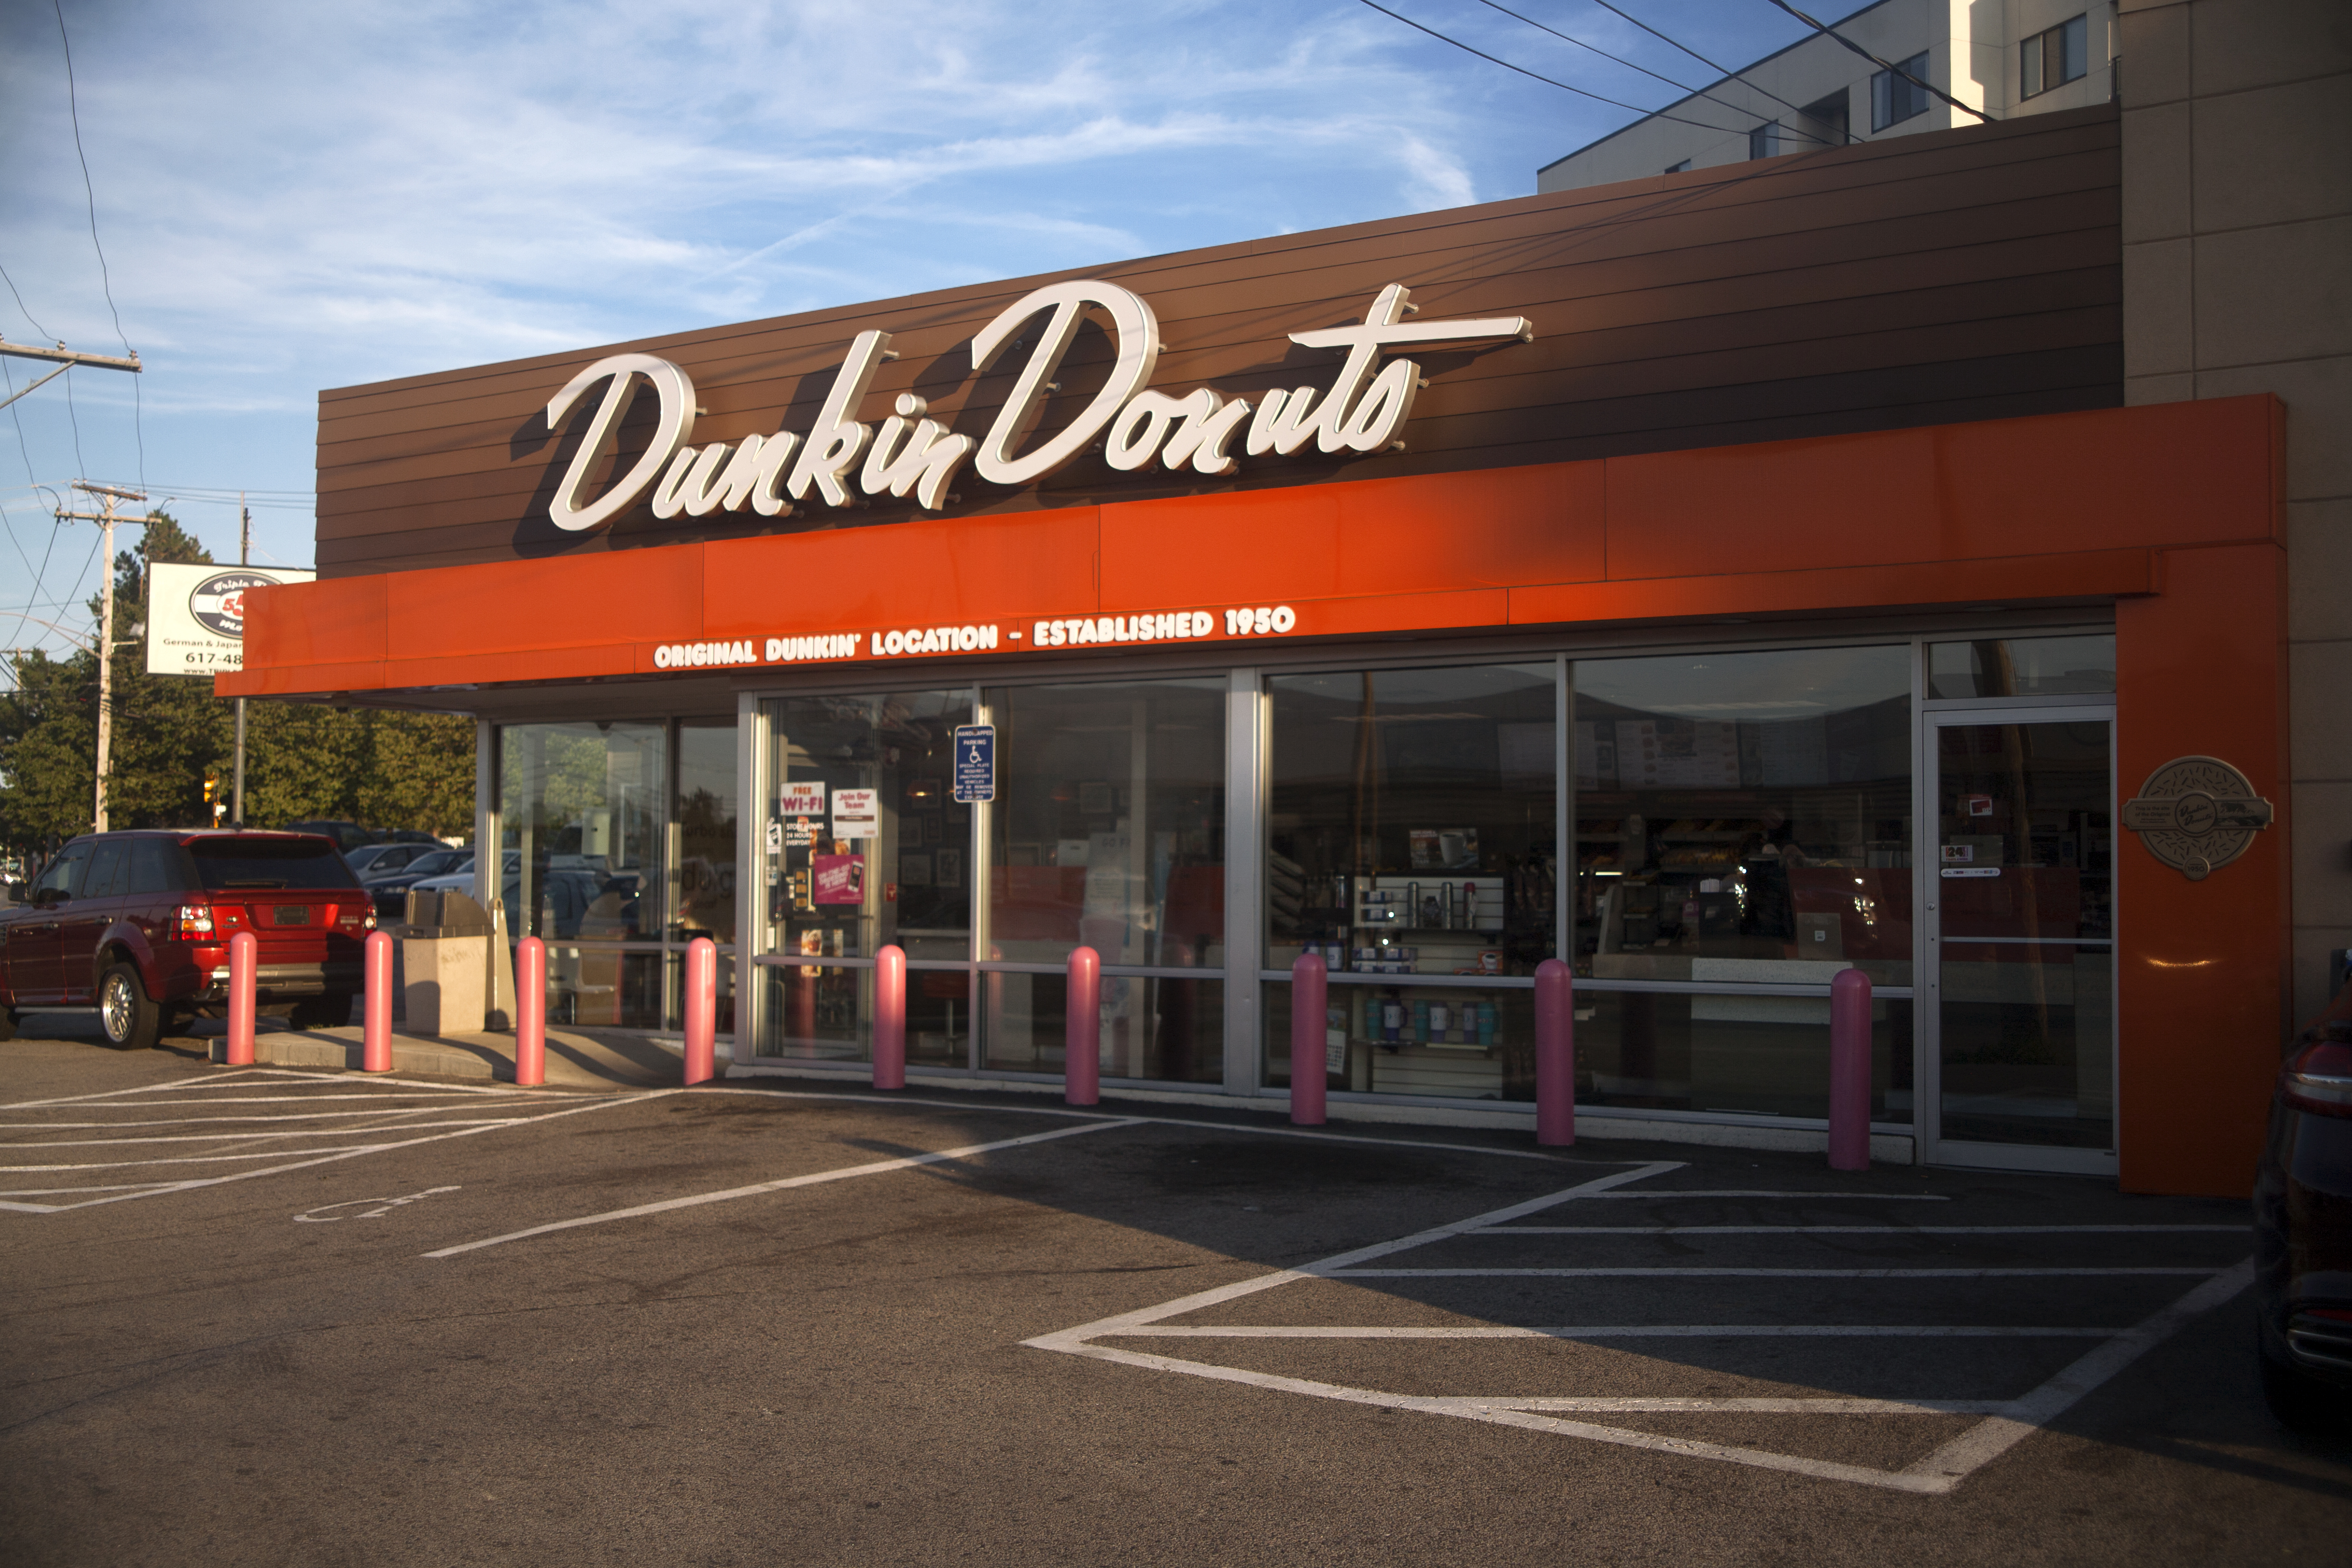 First Dunkin Donuts